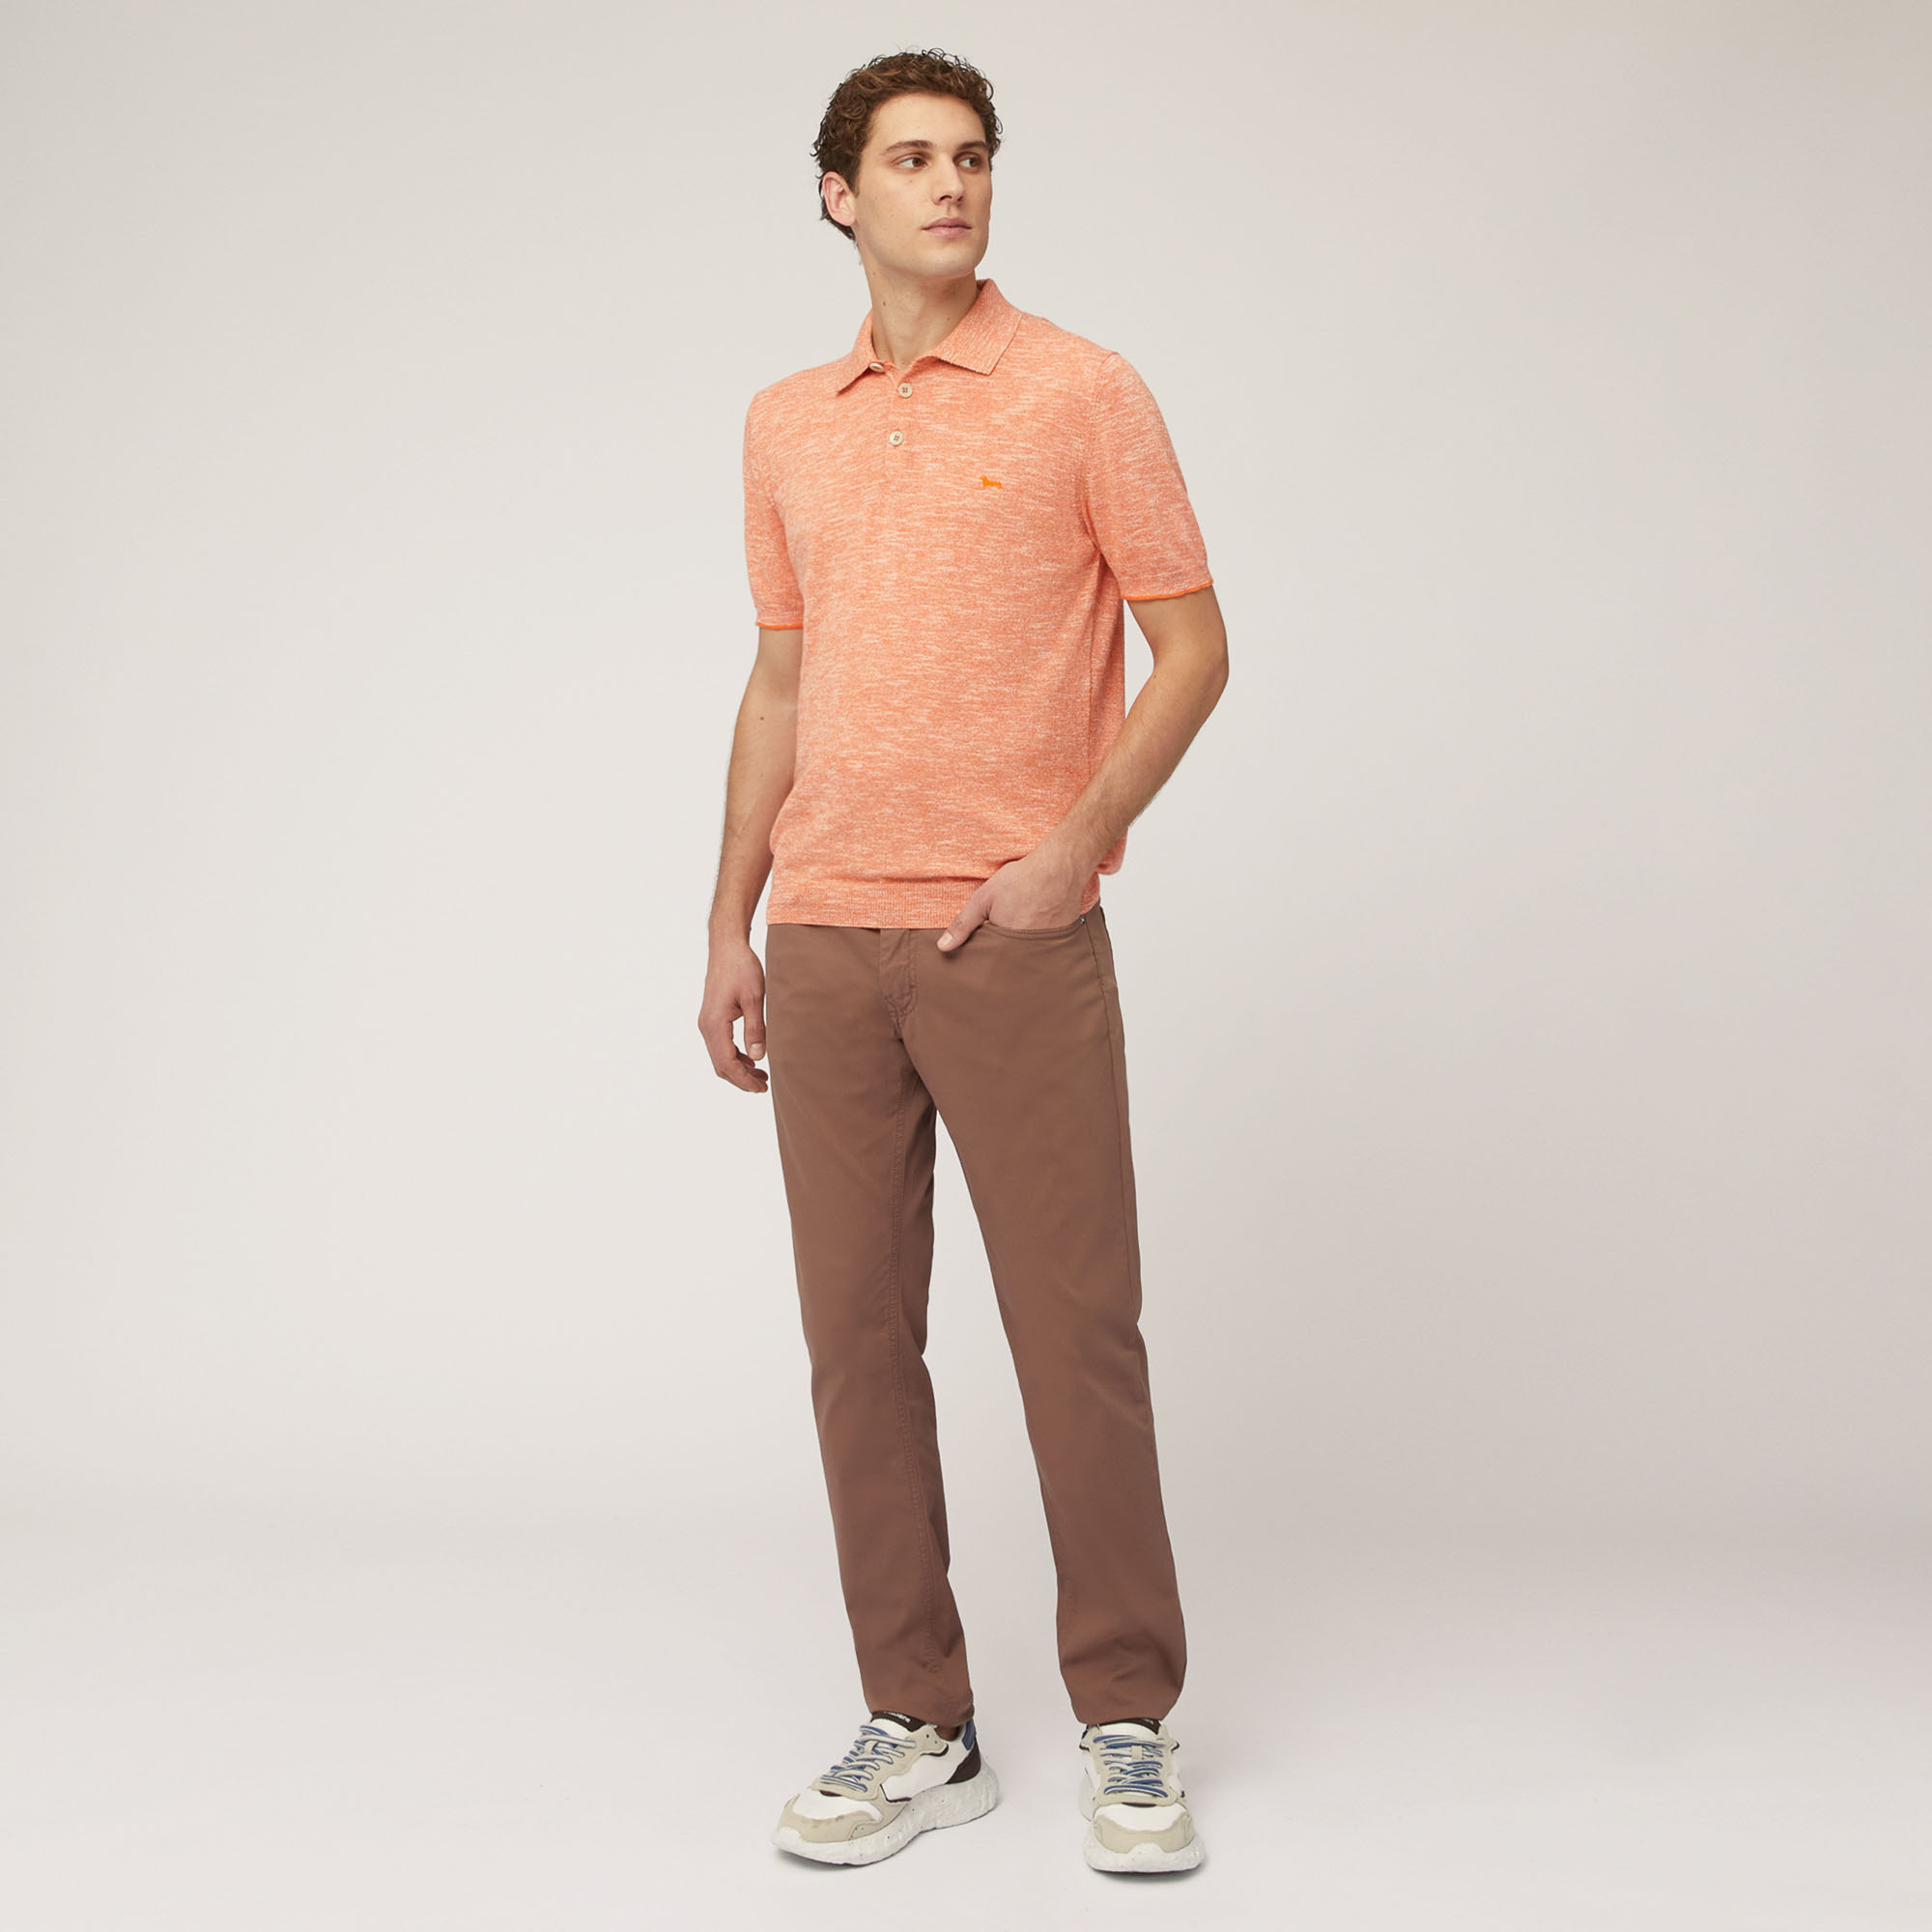 Cotton and Linen Tweed Polo, Orange, large image number 3